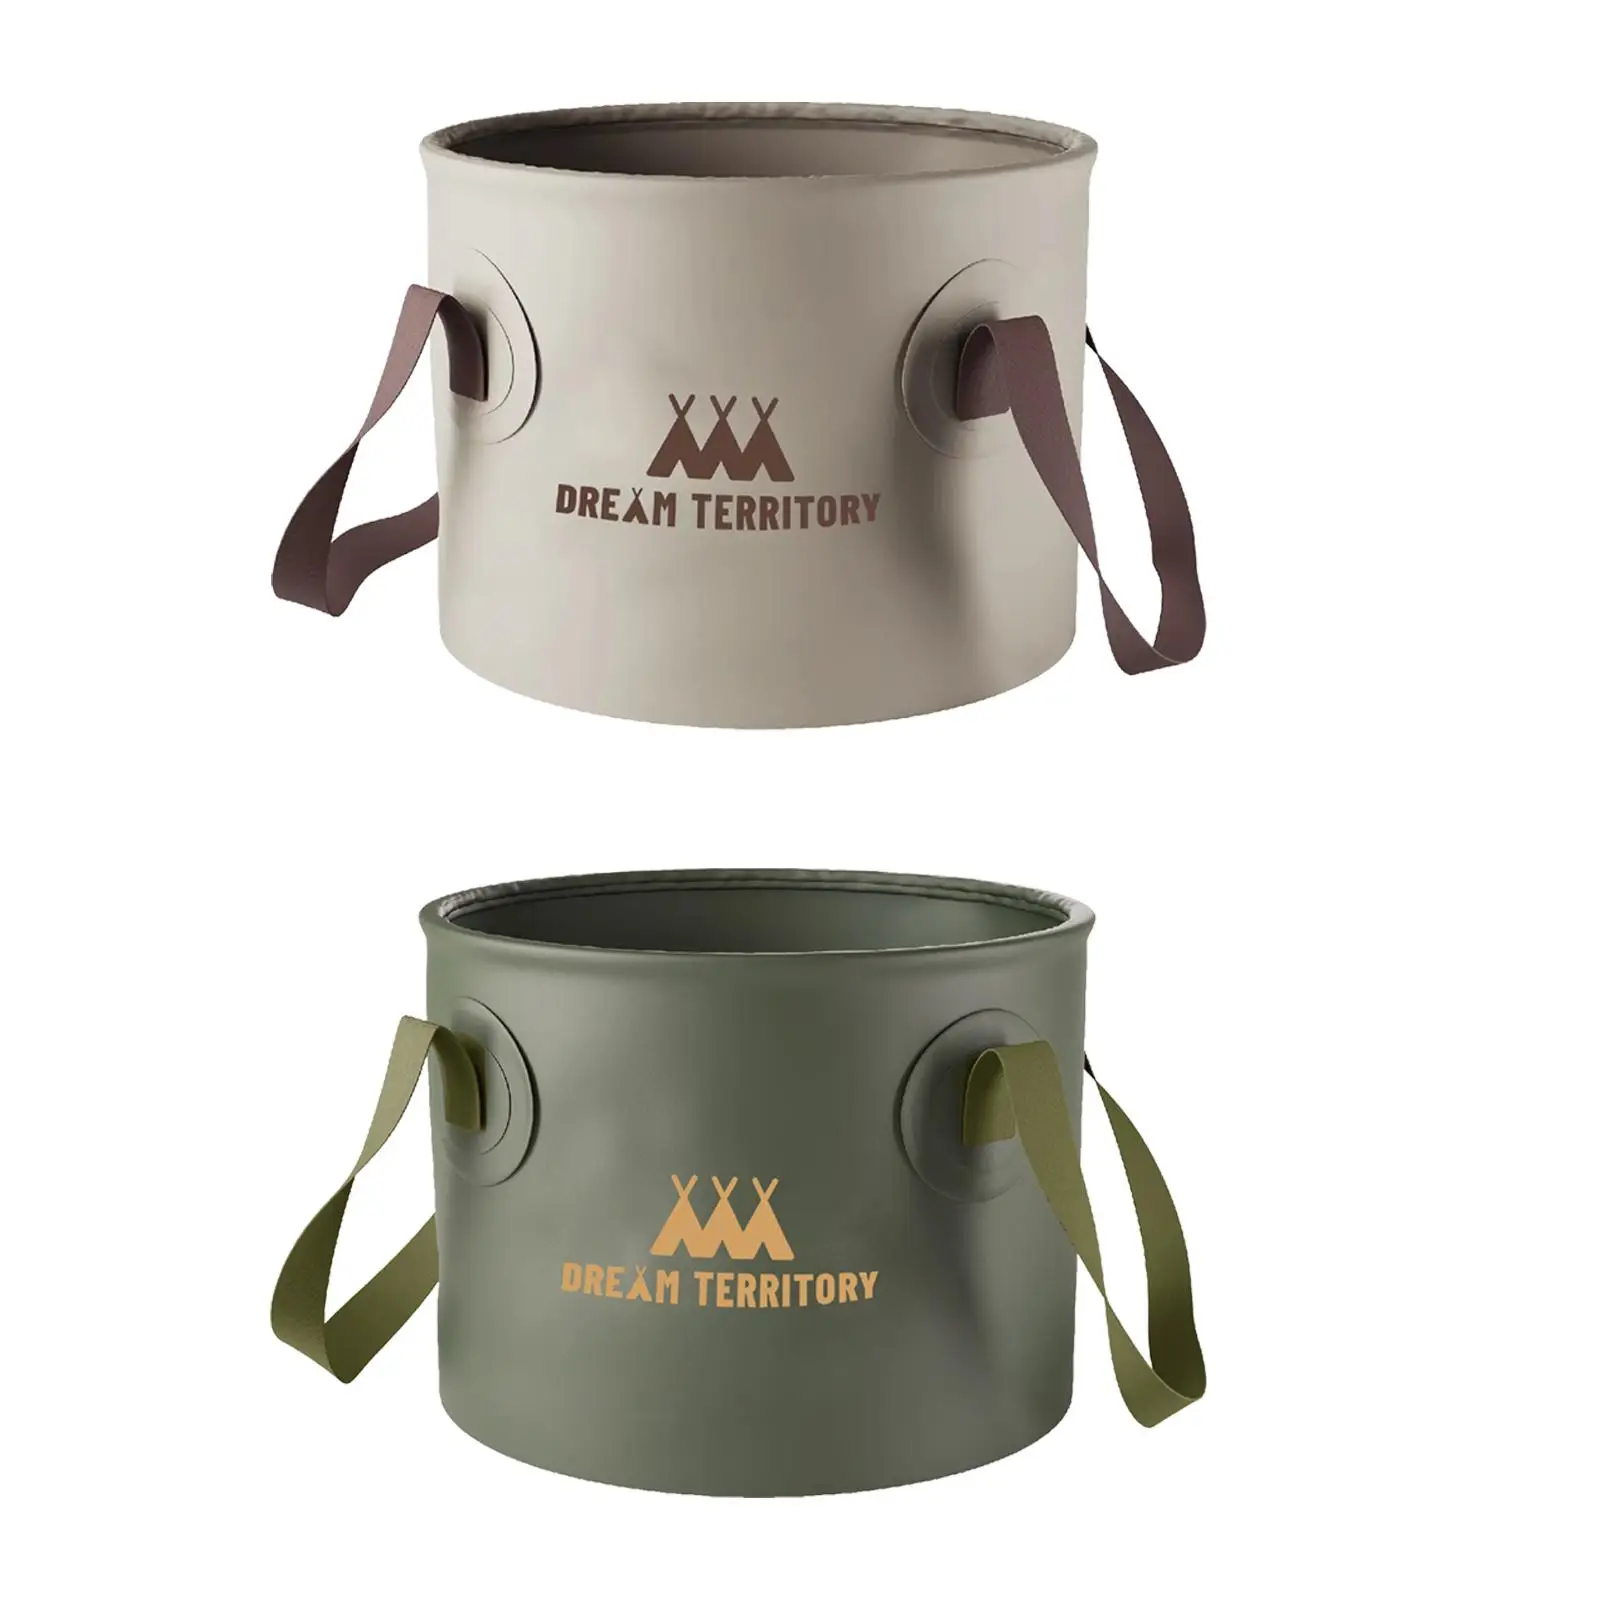 Collapsible Bucket Folding Water Storage Bucket with Handle Portable Wash Basin Water Bag Water Container for Fishing Travelling